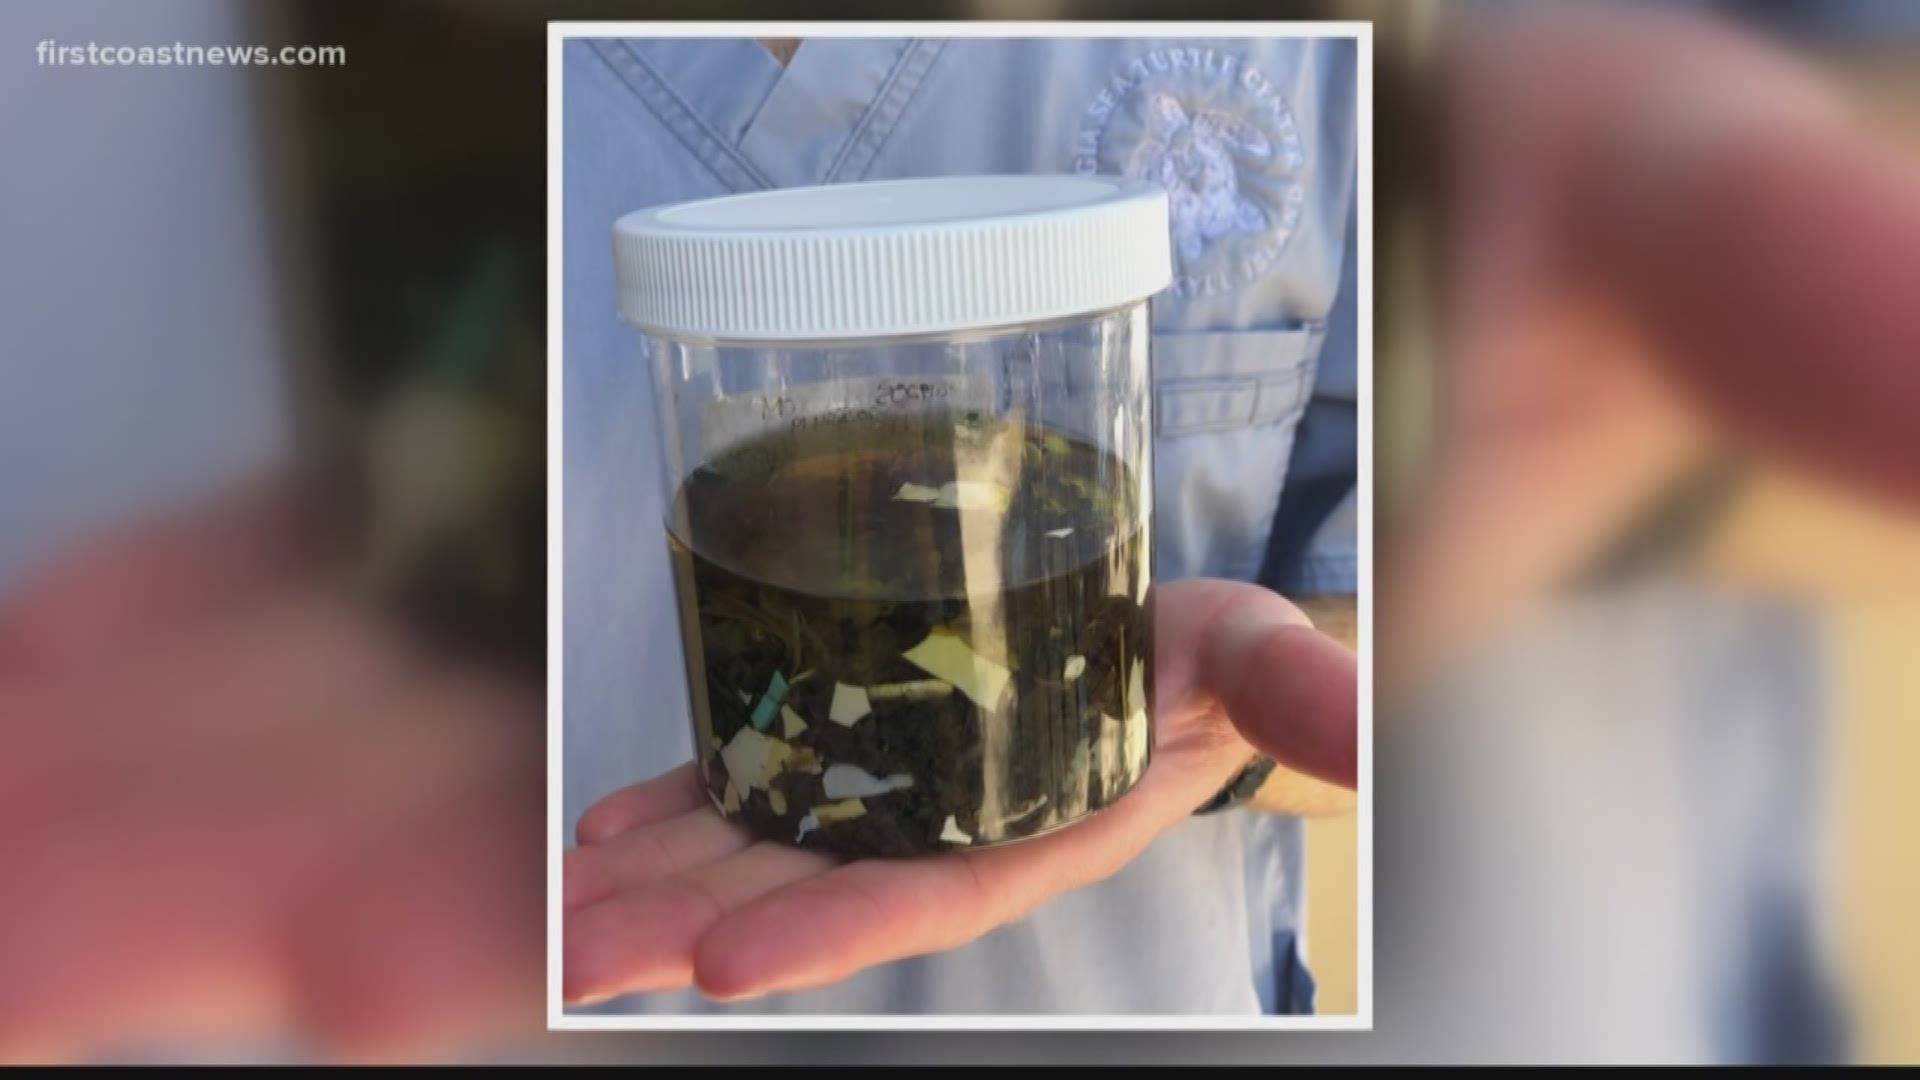 During a necropsy of the turtle at the sea turtle hospital in Jekyll Island, biologists found all kinds of man-made objects in the animal that it had eaten.